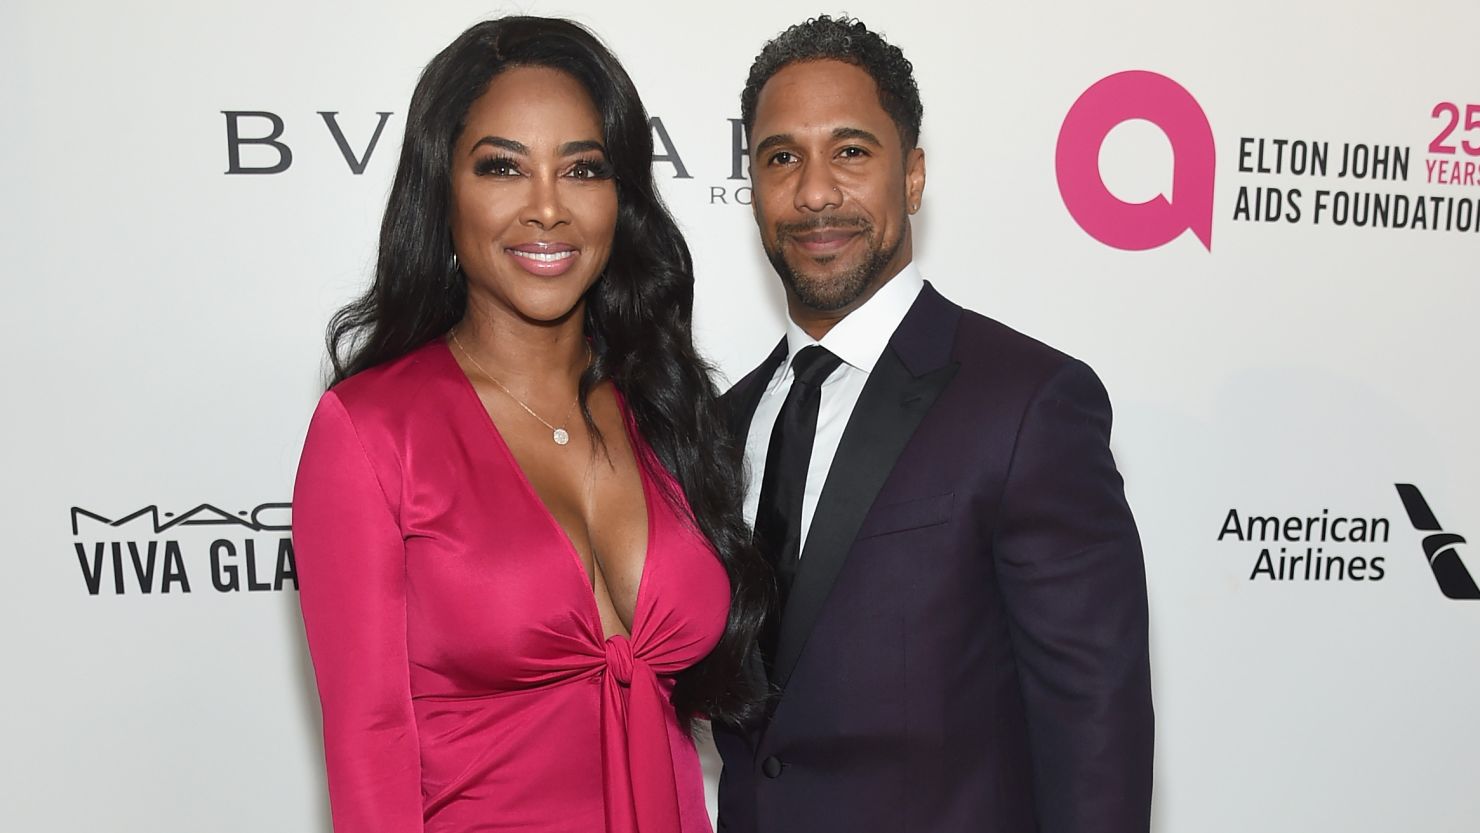 Kenya Moore, left, and Marc Daly attend the 26th annual Elton John AIDS Foundation's Academy Awards Viewing Party in West Hollywood on March 4, 2018.